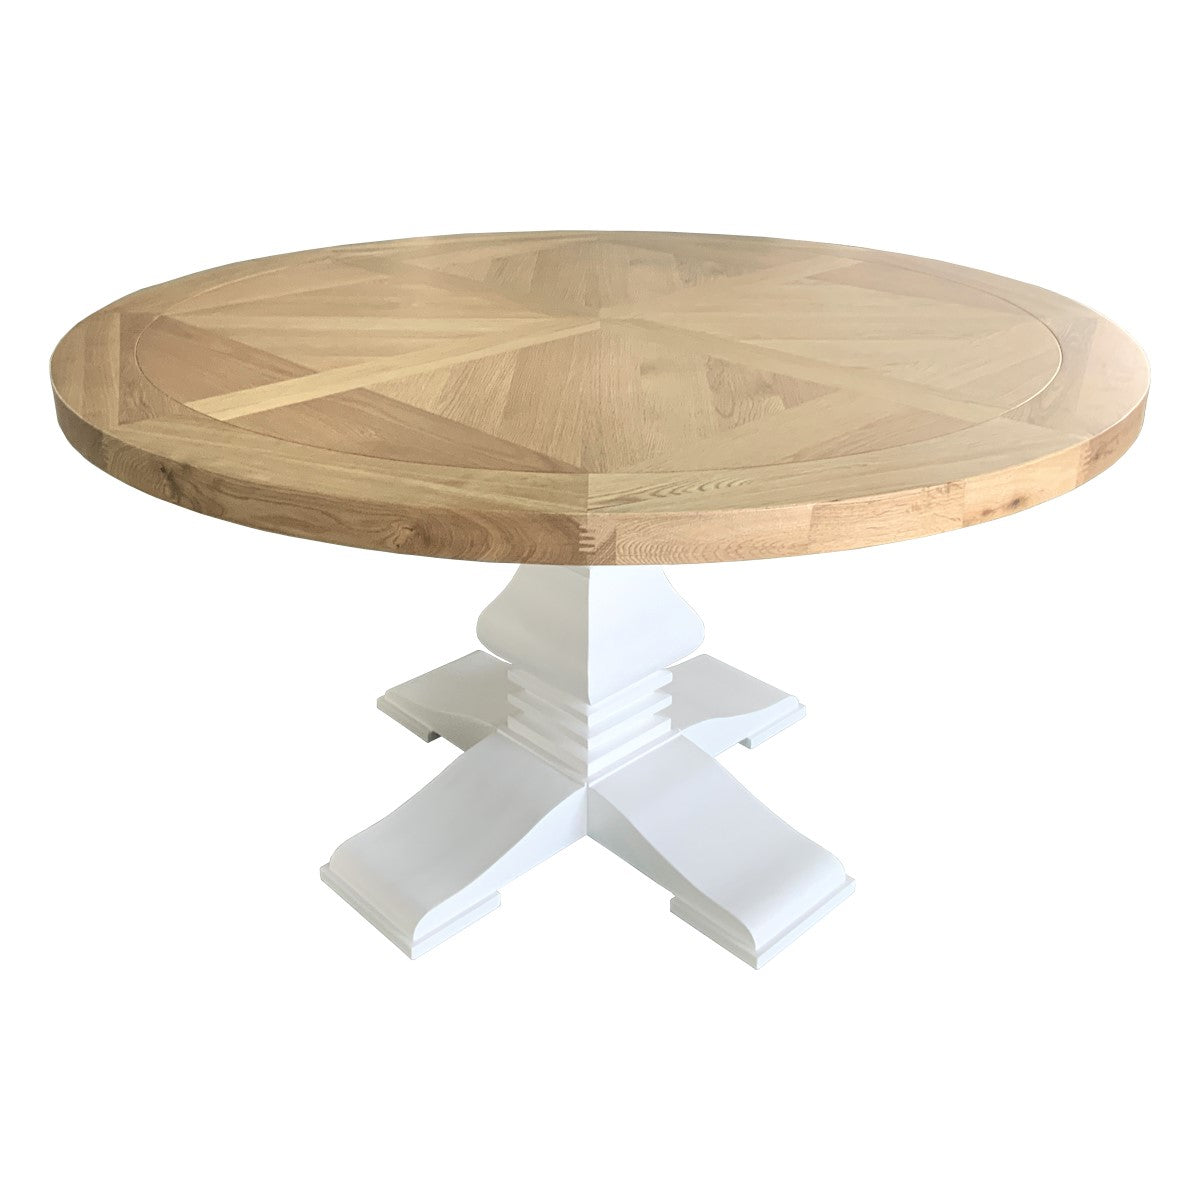 Belview Dining Table